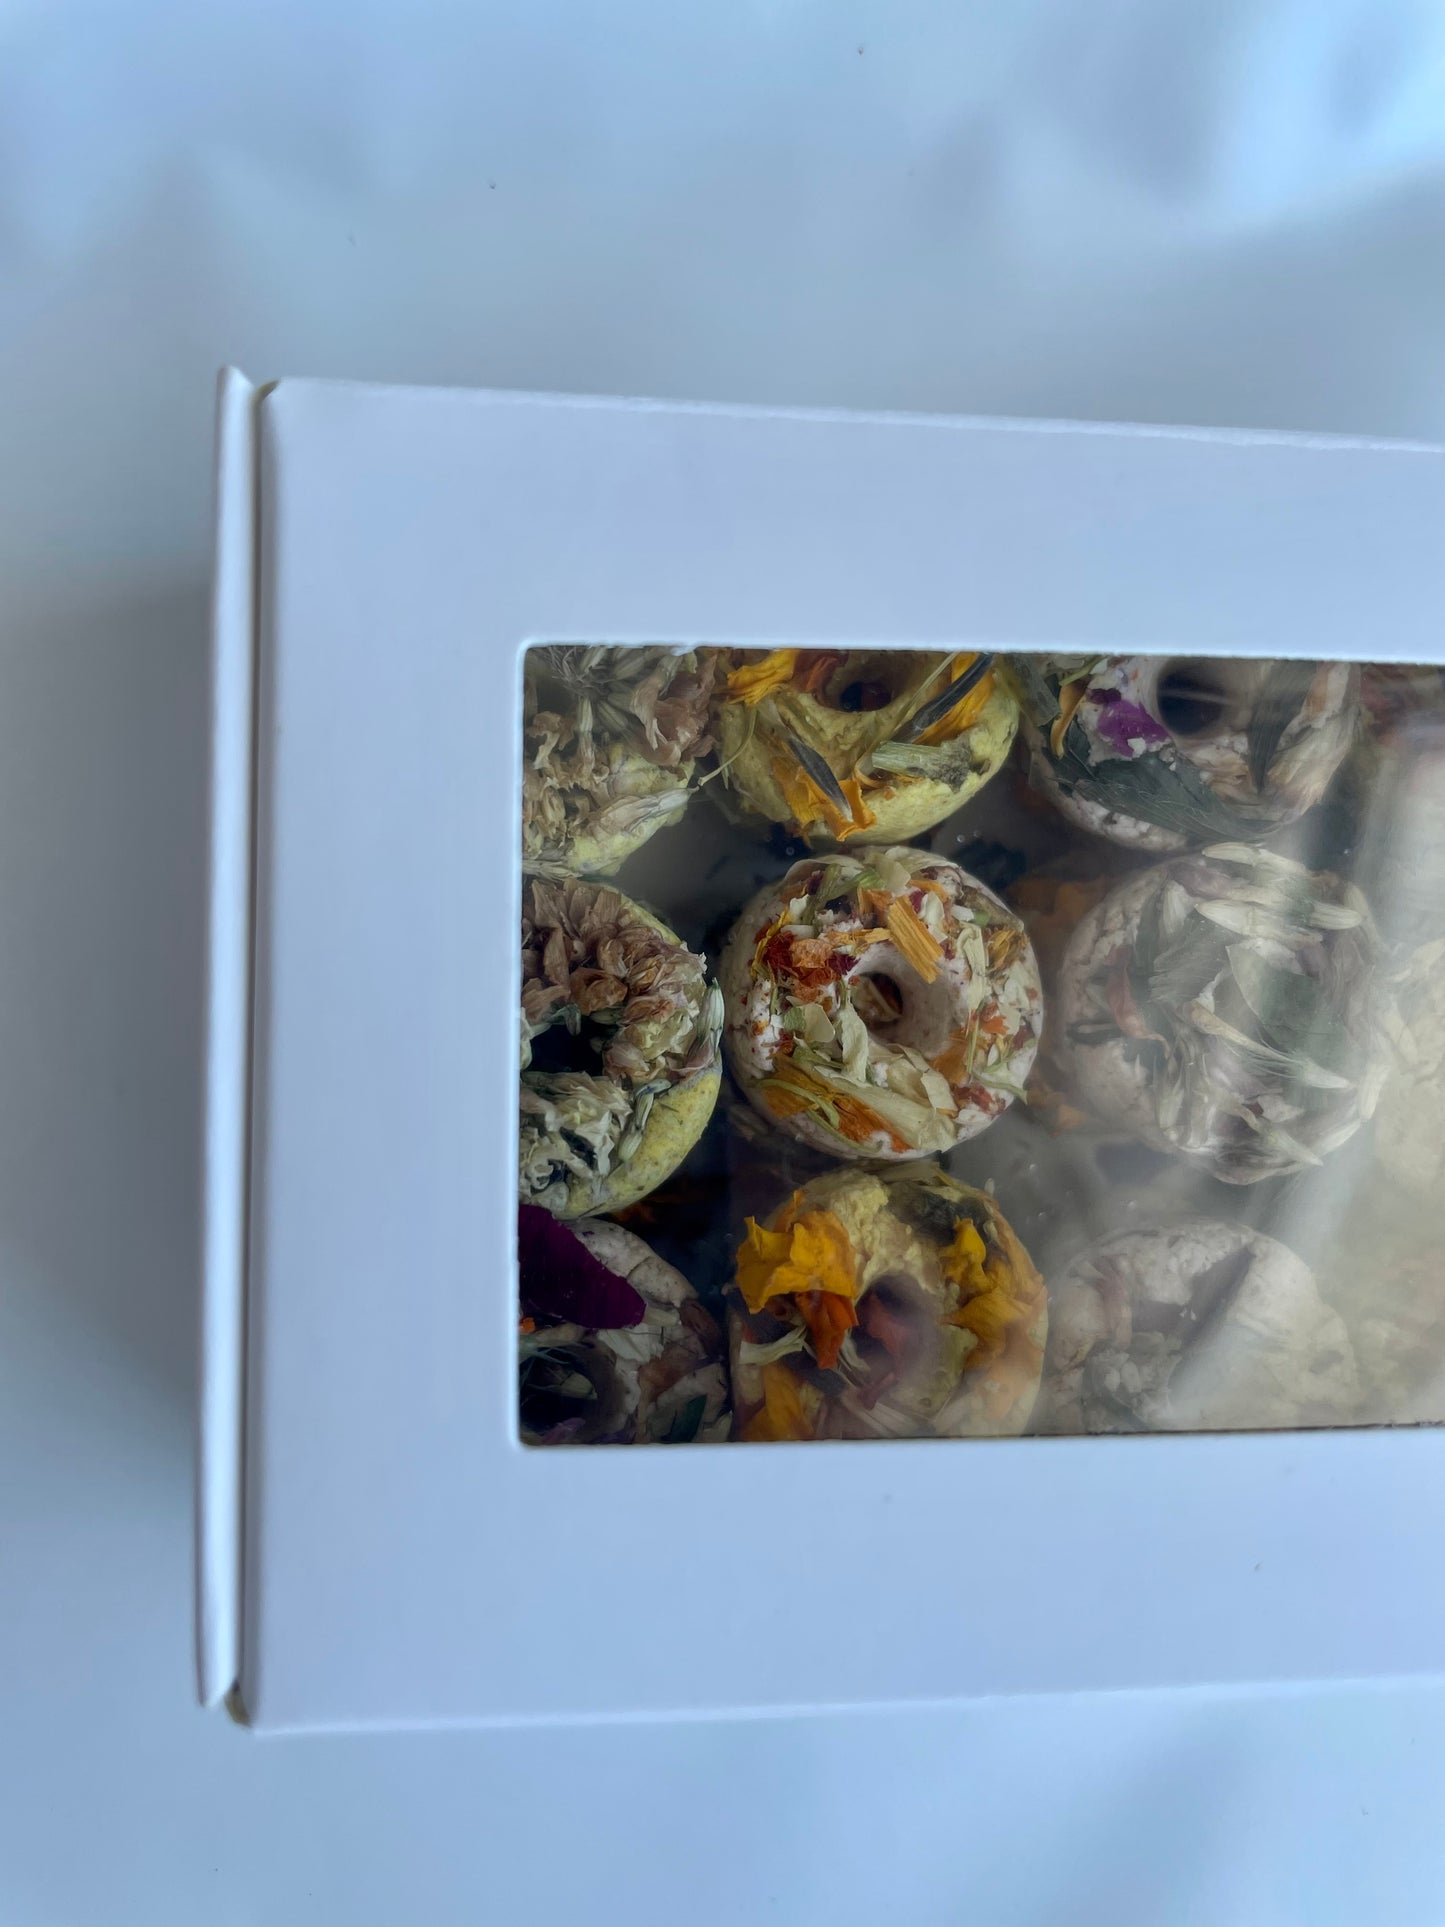  Gourmet donuts with spring flowers